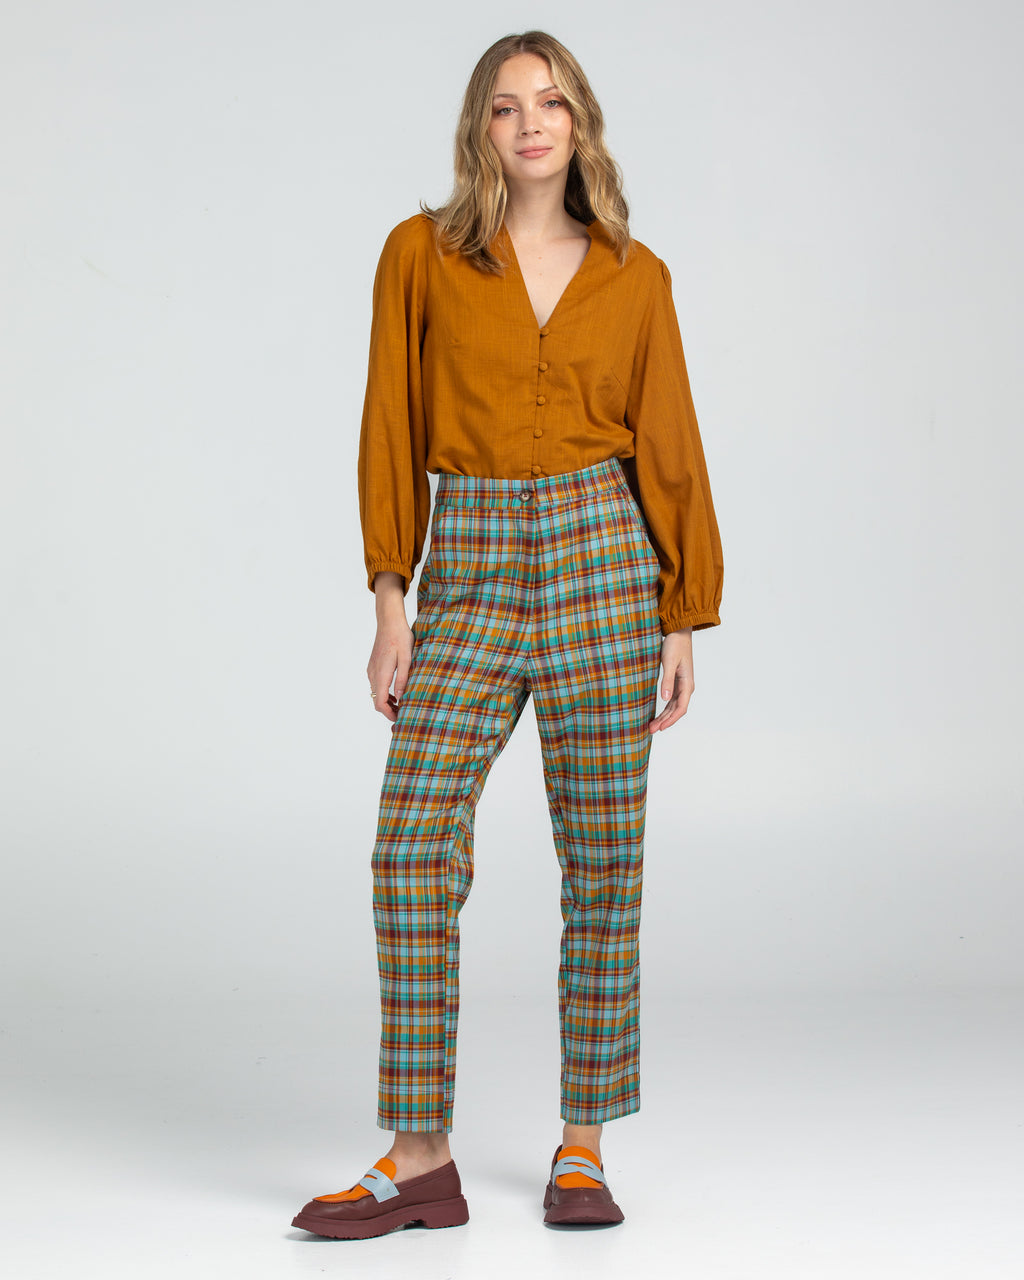 The Kiara pants by boom shankar are ultra modern fitted pant with stretch in a fun check plaid design